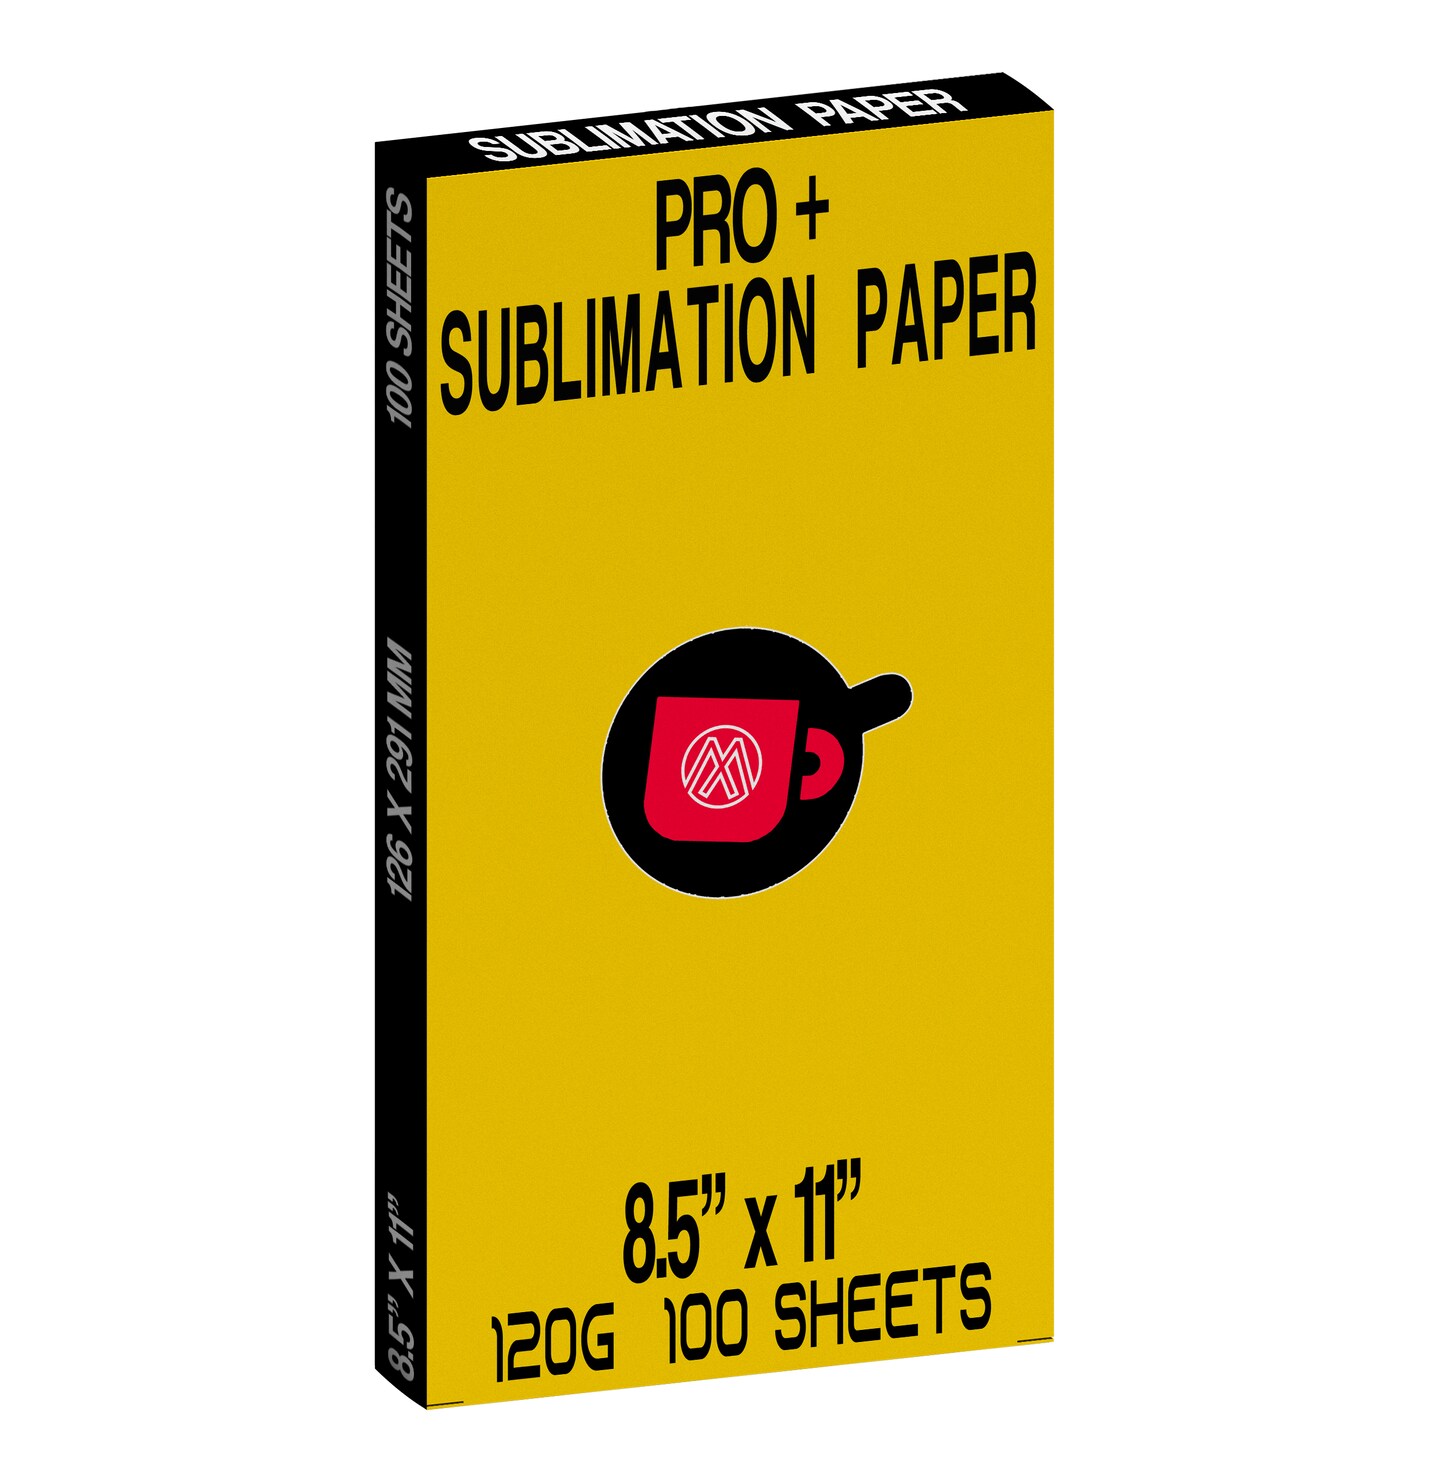 HTVRONT Sublimation Ink and Paper Review 